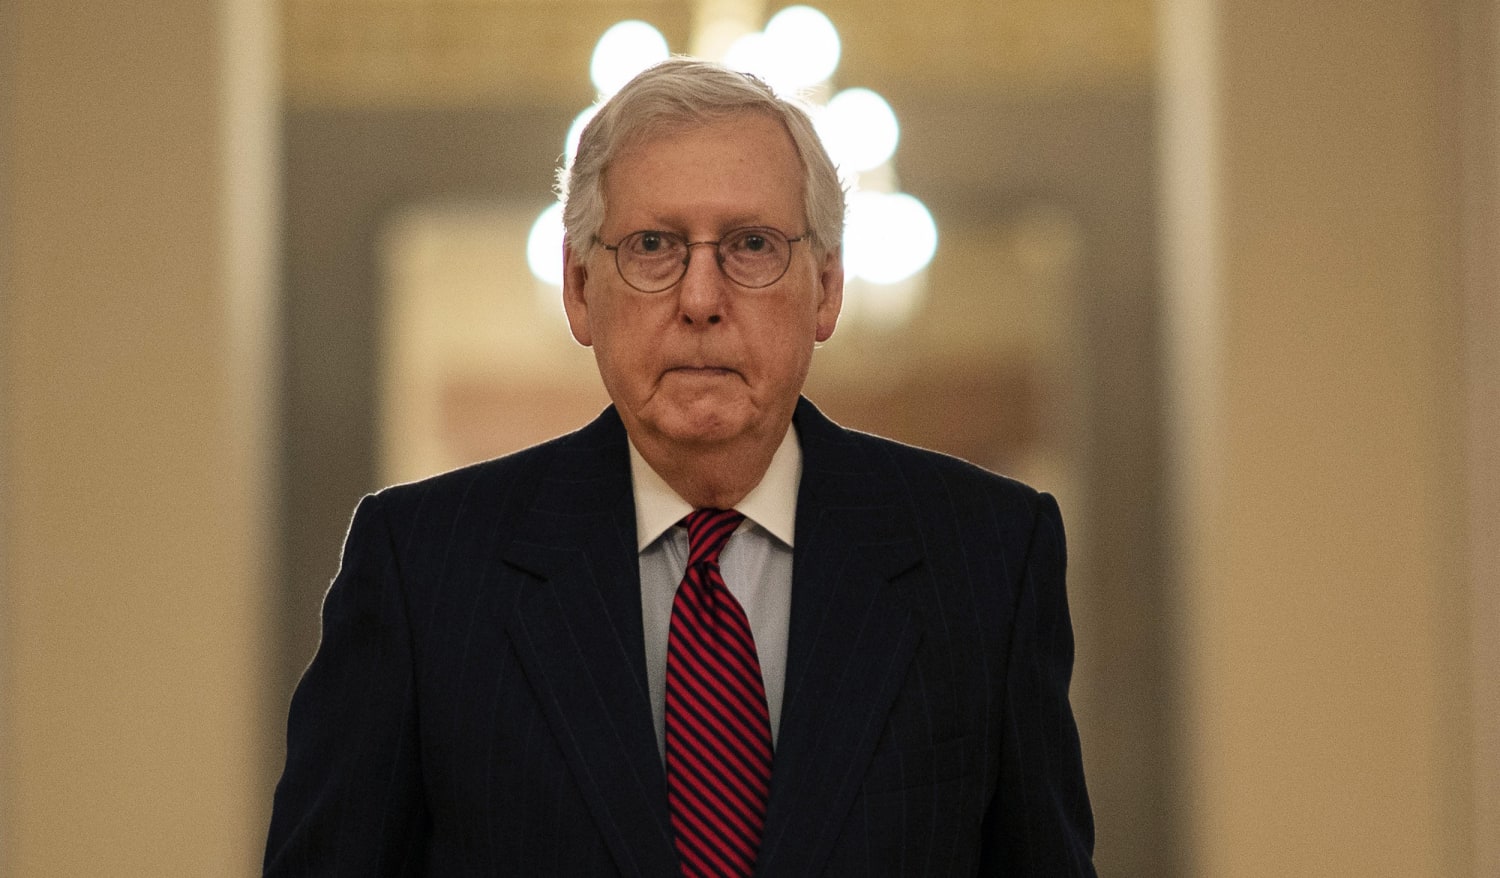 McConnell says Jan. 6 committee’s findings are ‘something the public needs to know’